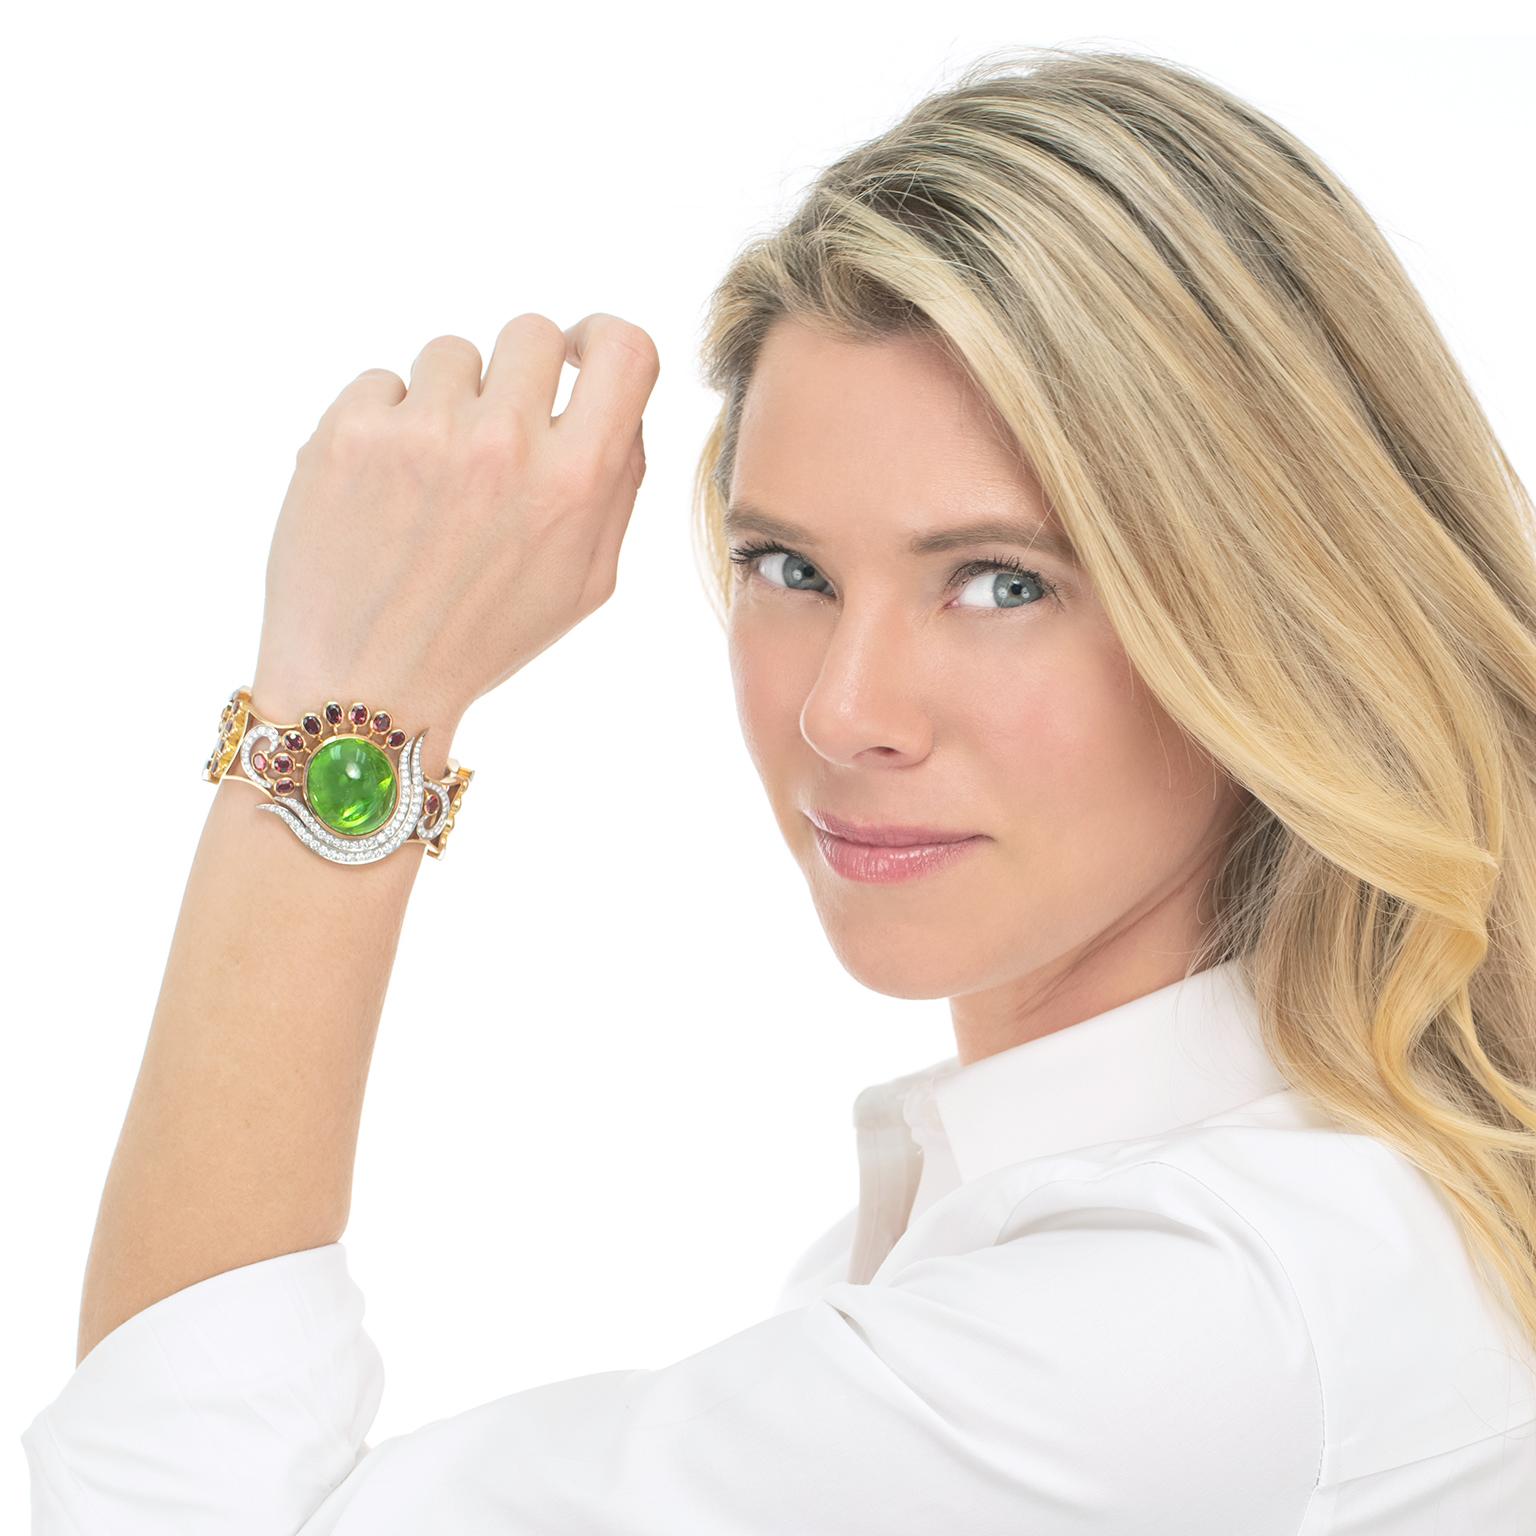 Circa 1980s, 18k, Swiss. This brilliantly colorful bracelet features a superb one-of-a-kind design and sublime stones. A massive 70 carat peridot is the visual center of the bracelet with diamonds sweeping around one side and uniquely hued